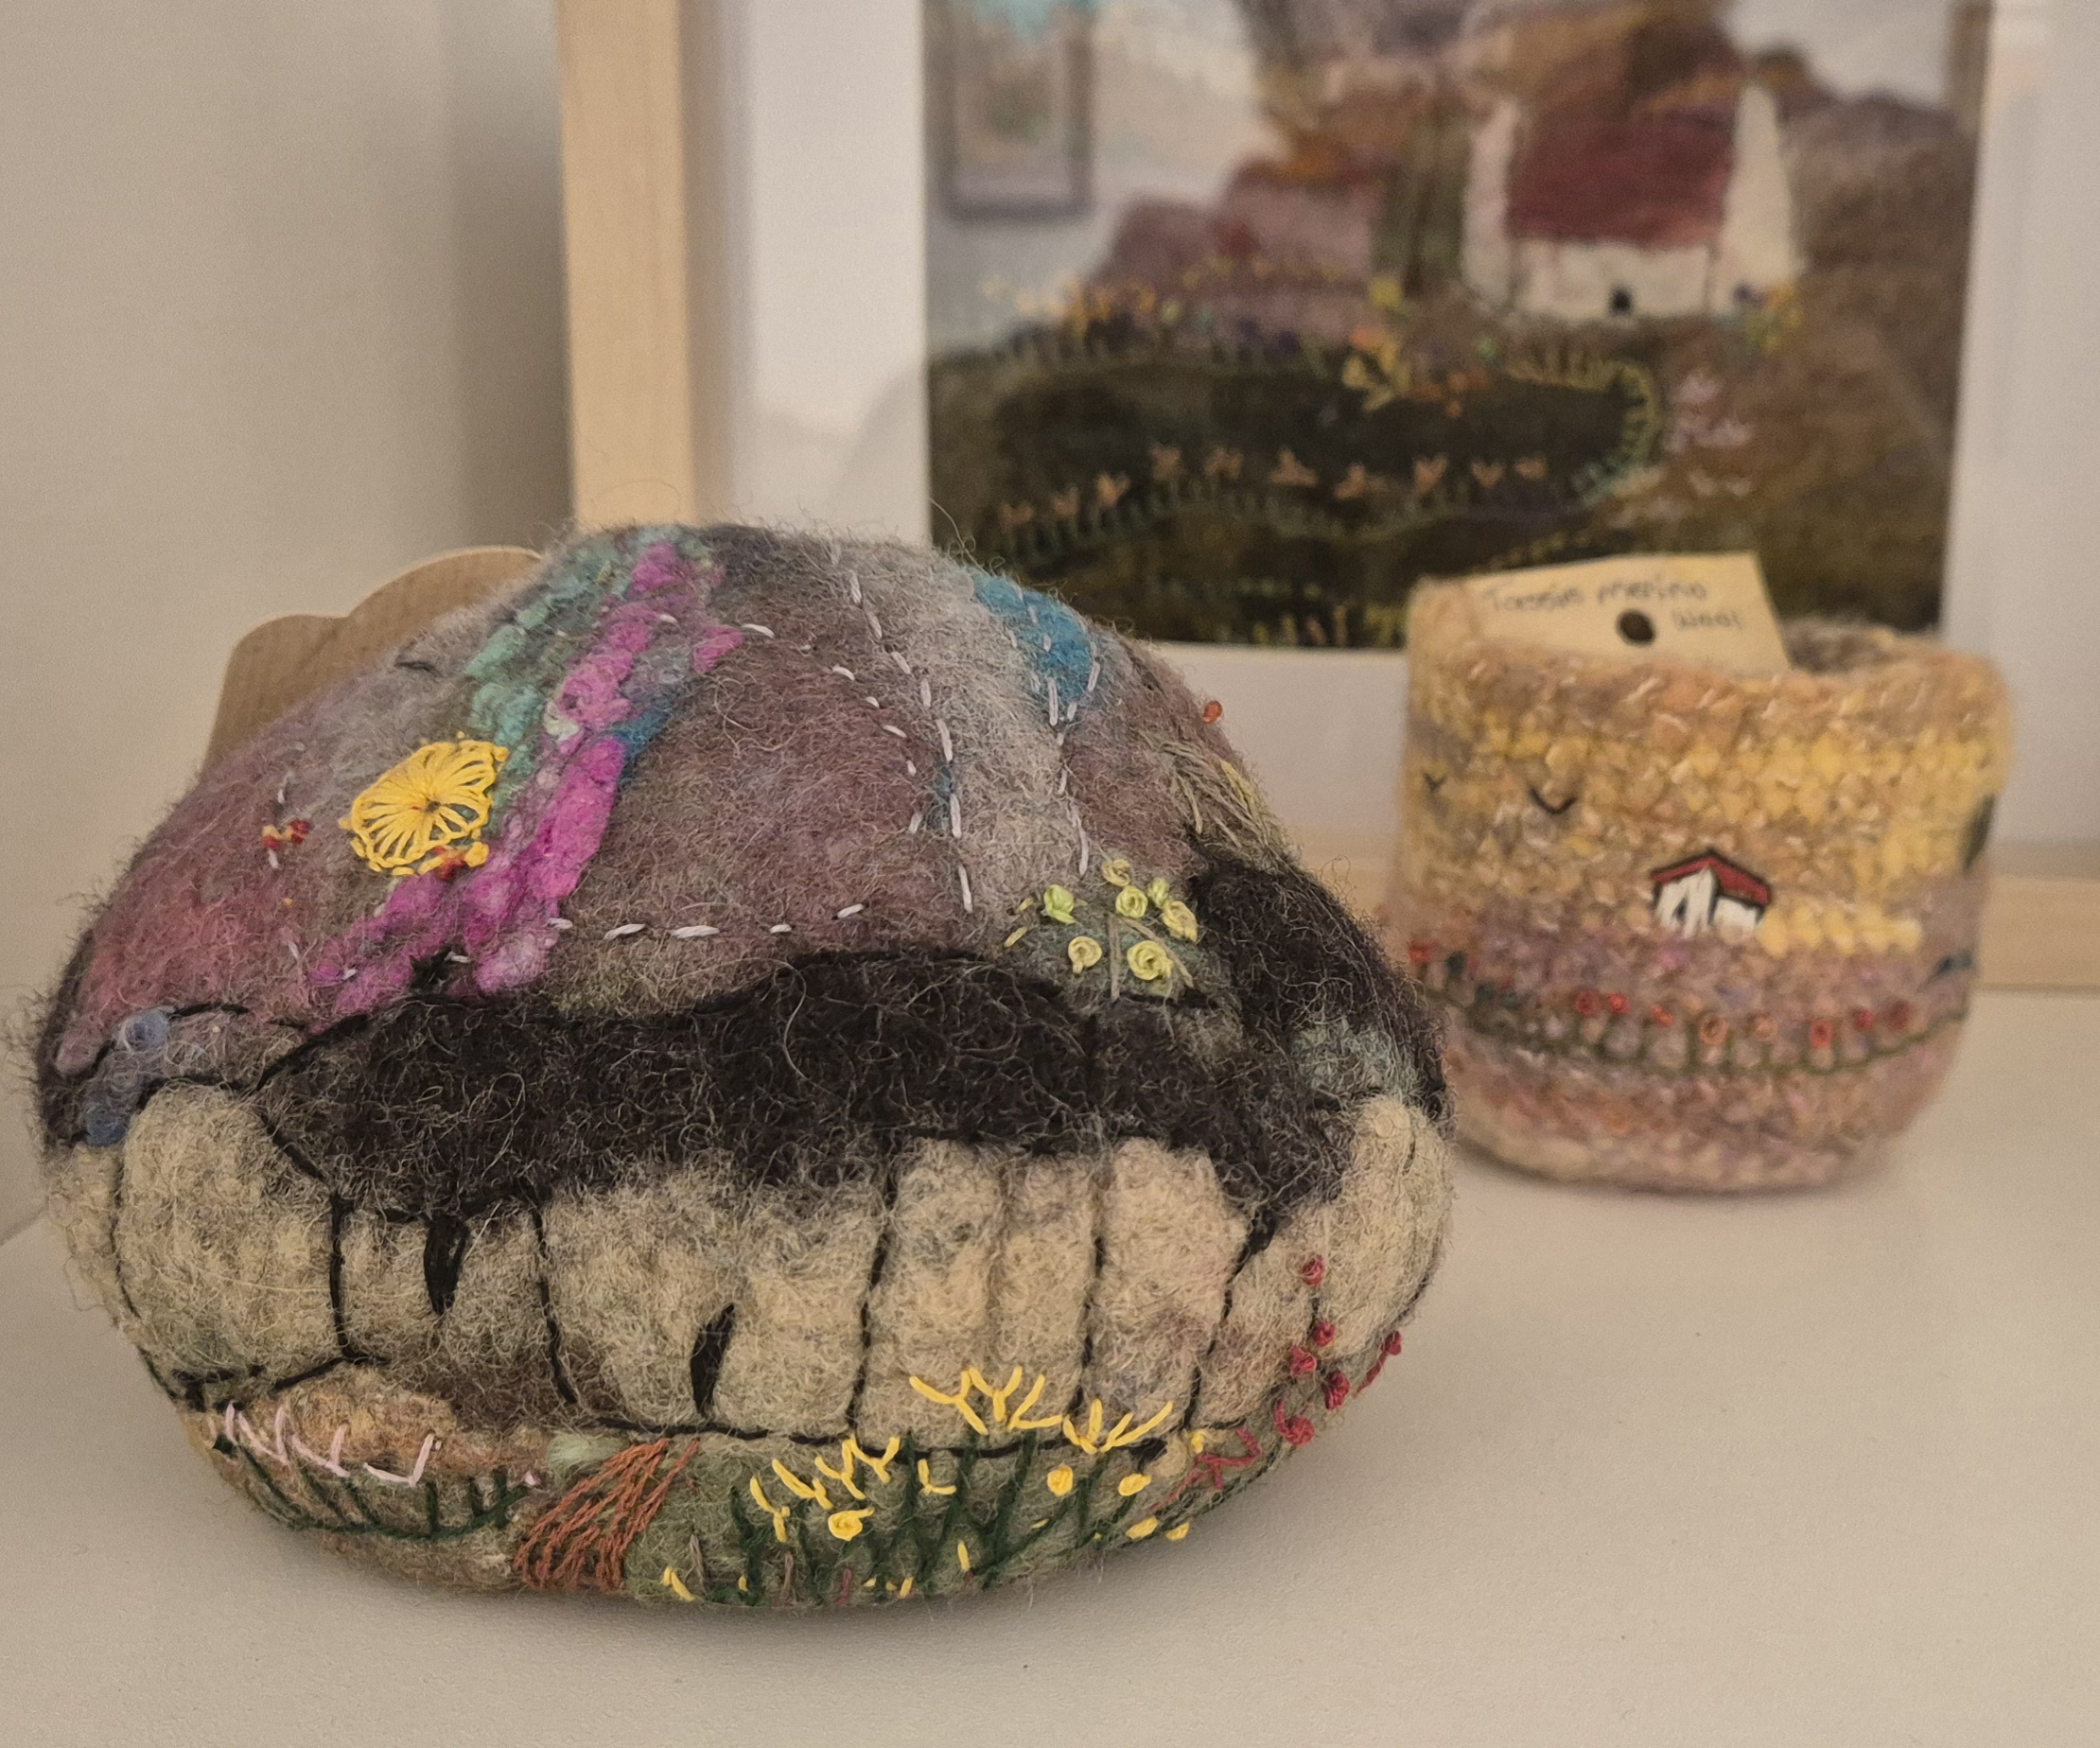 Images shows a textile artist pot for sale for the Gallery Profile story Discover Local talent, vibrant spaces and community connection at the Sheffield Art Gallery Art Trails Tasmania for the Artists Ensemble membership